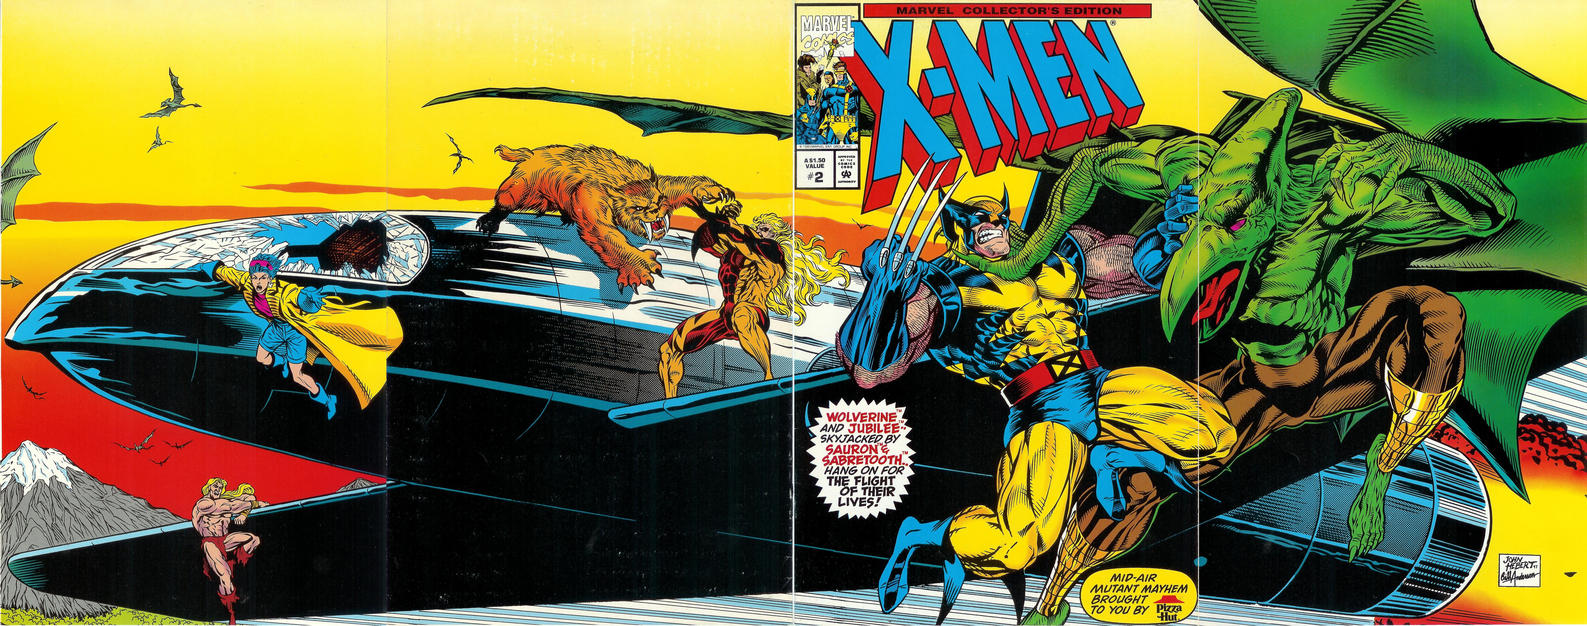 X-Men Collector's Edition [Pizza Hut] #2-Very Good (3.5 – 5)